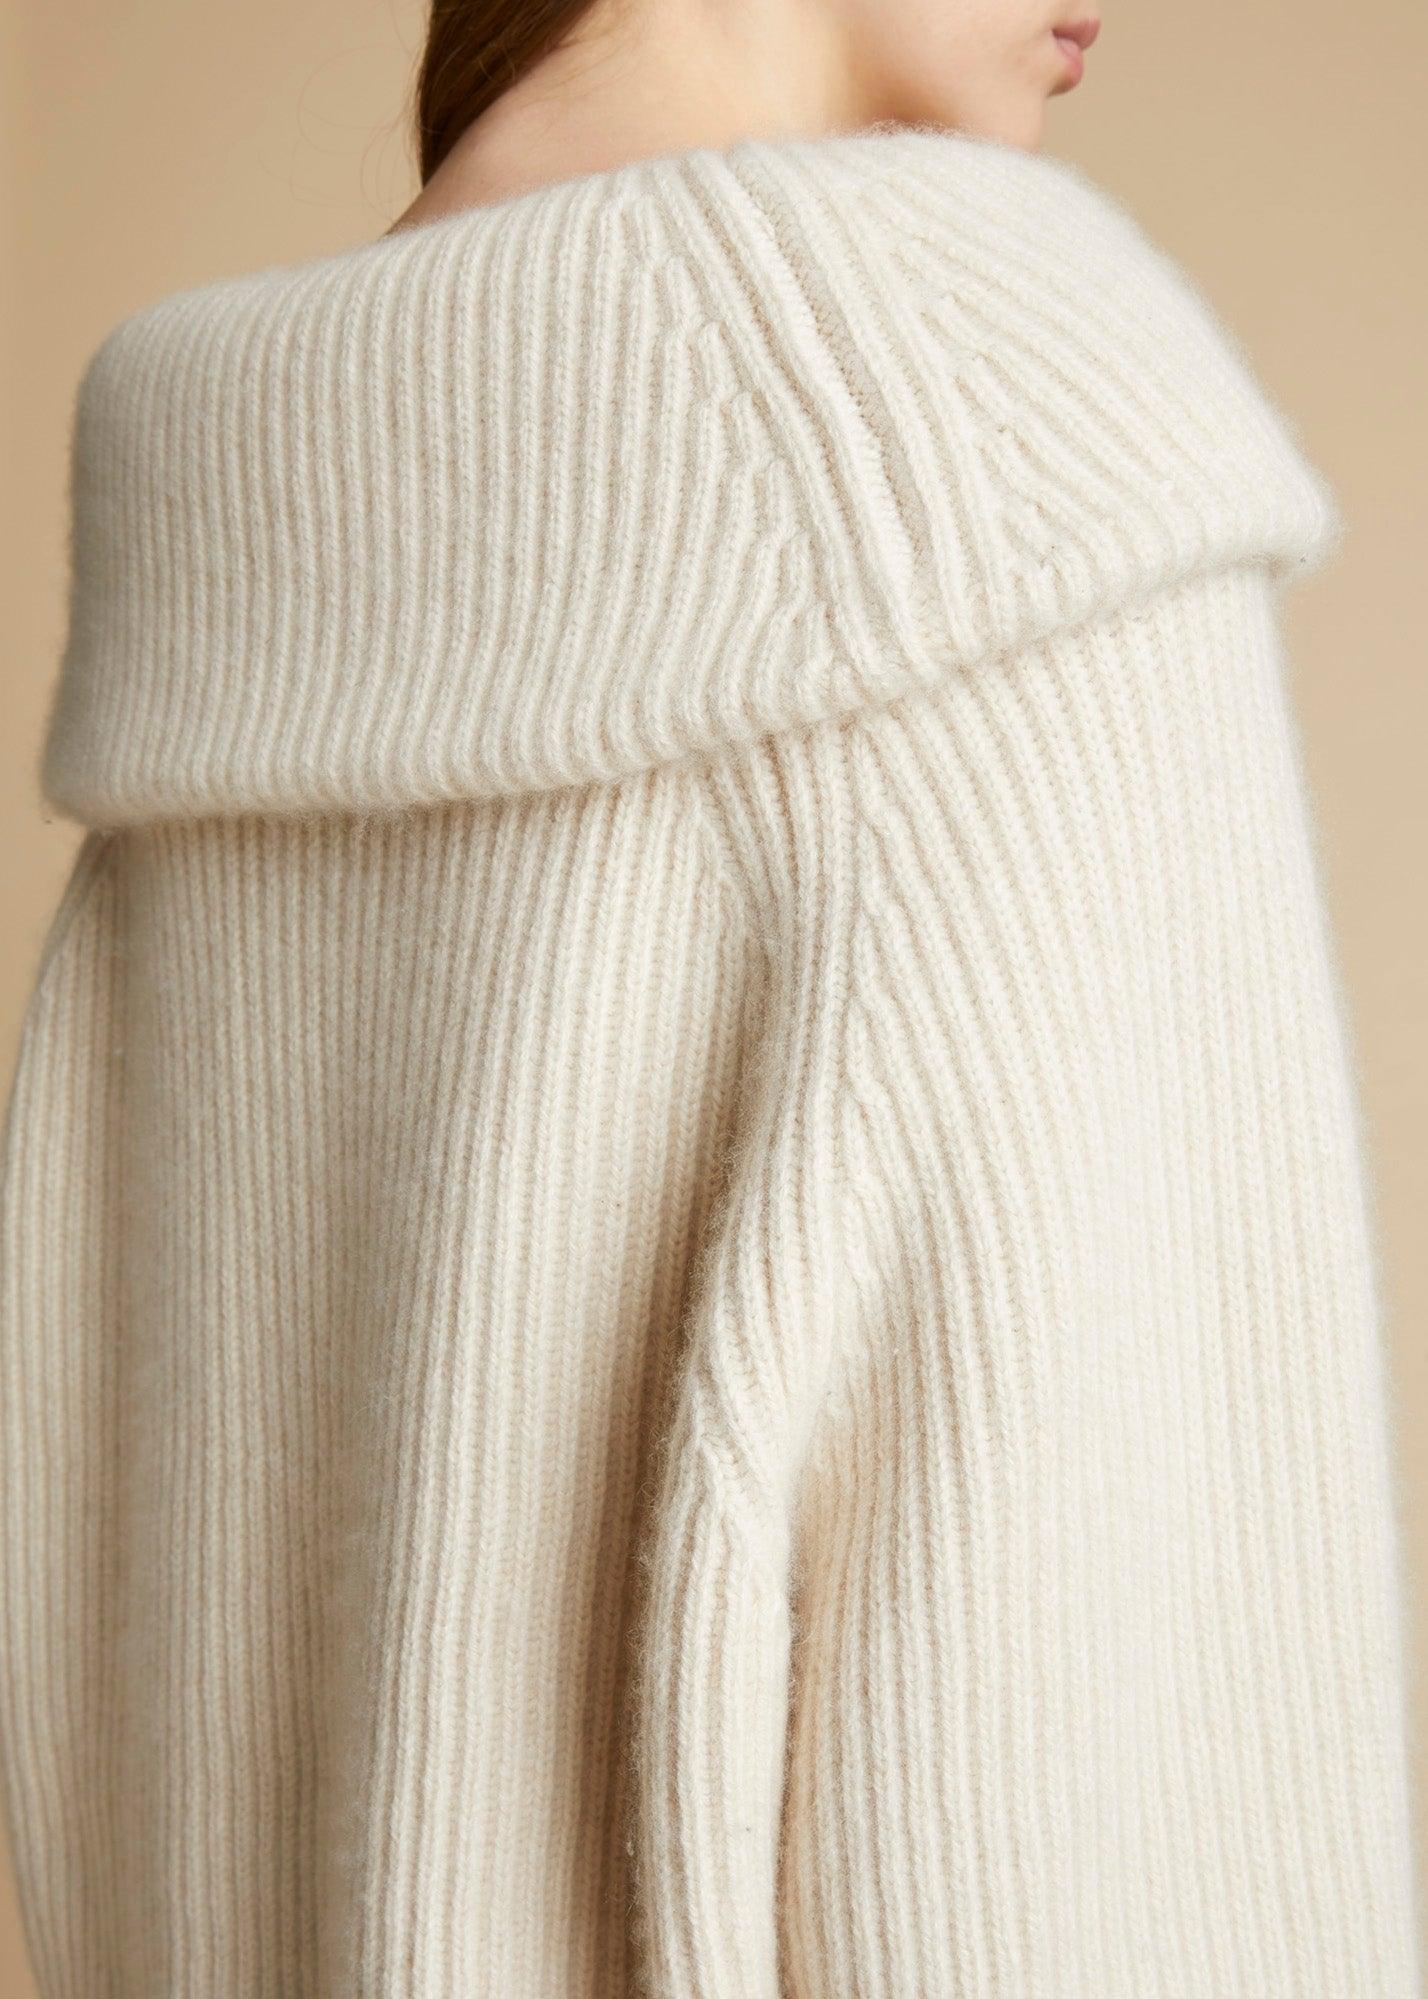 The Raisa Sweater in Magnolia - The Iconic Issue